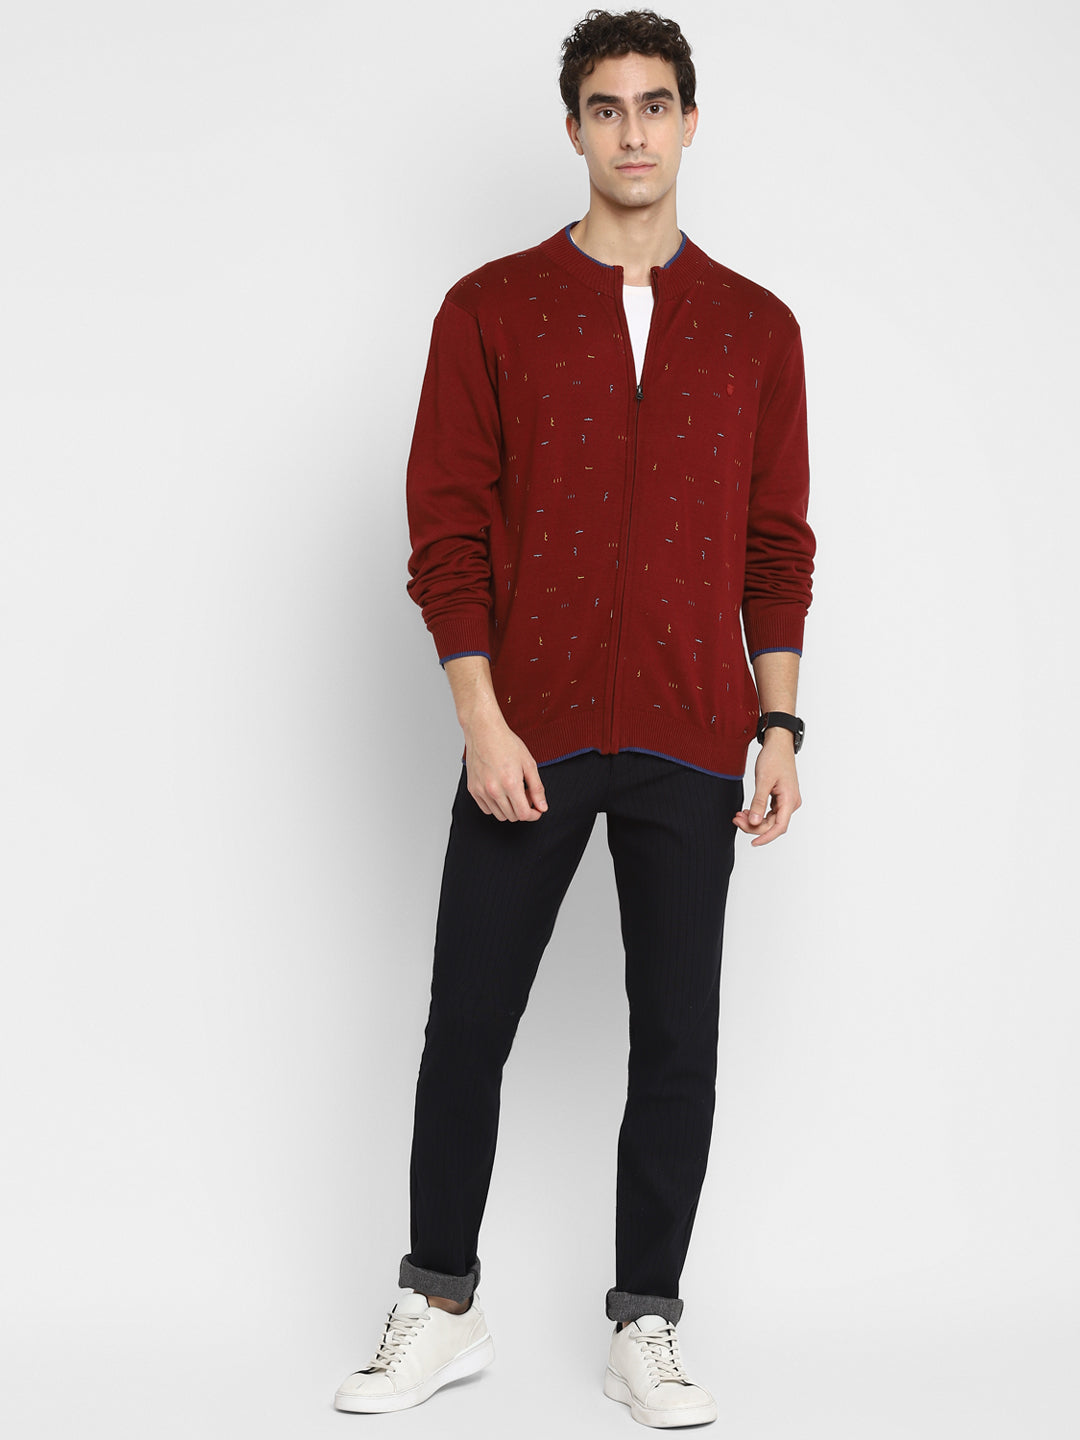 Red Printed Full Sleeve Sweater for Men